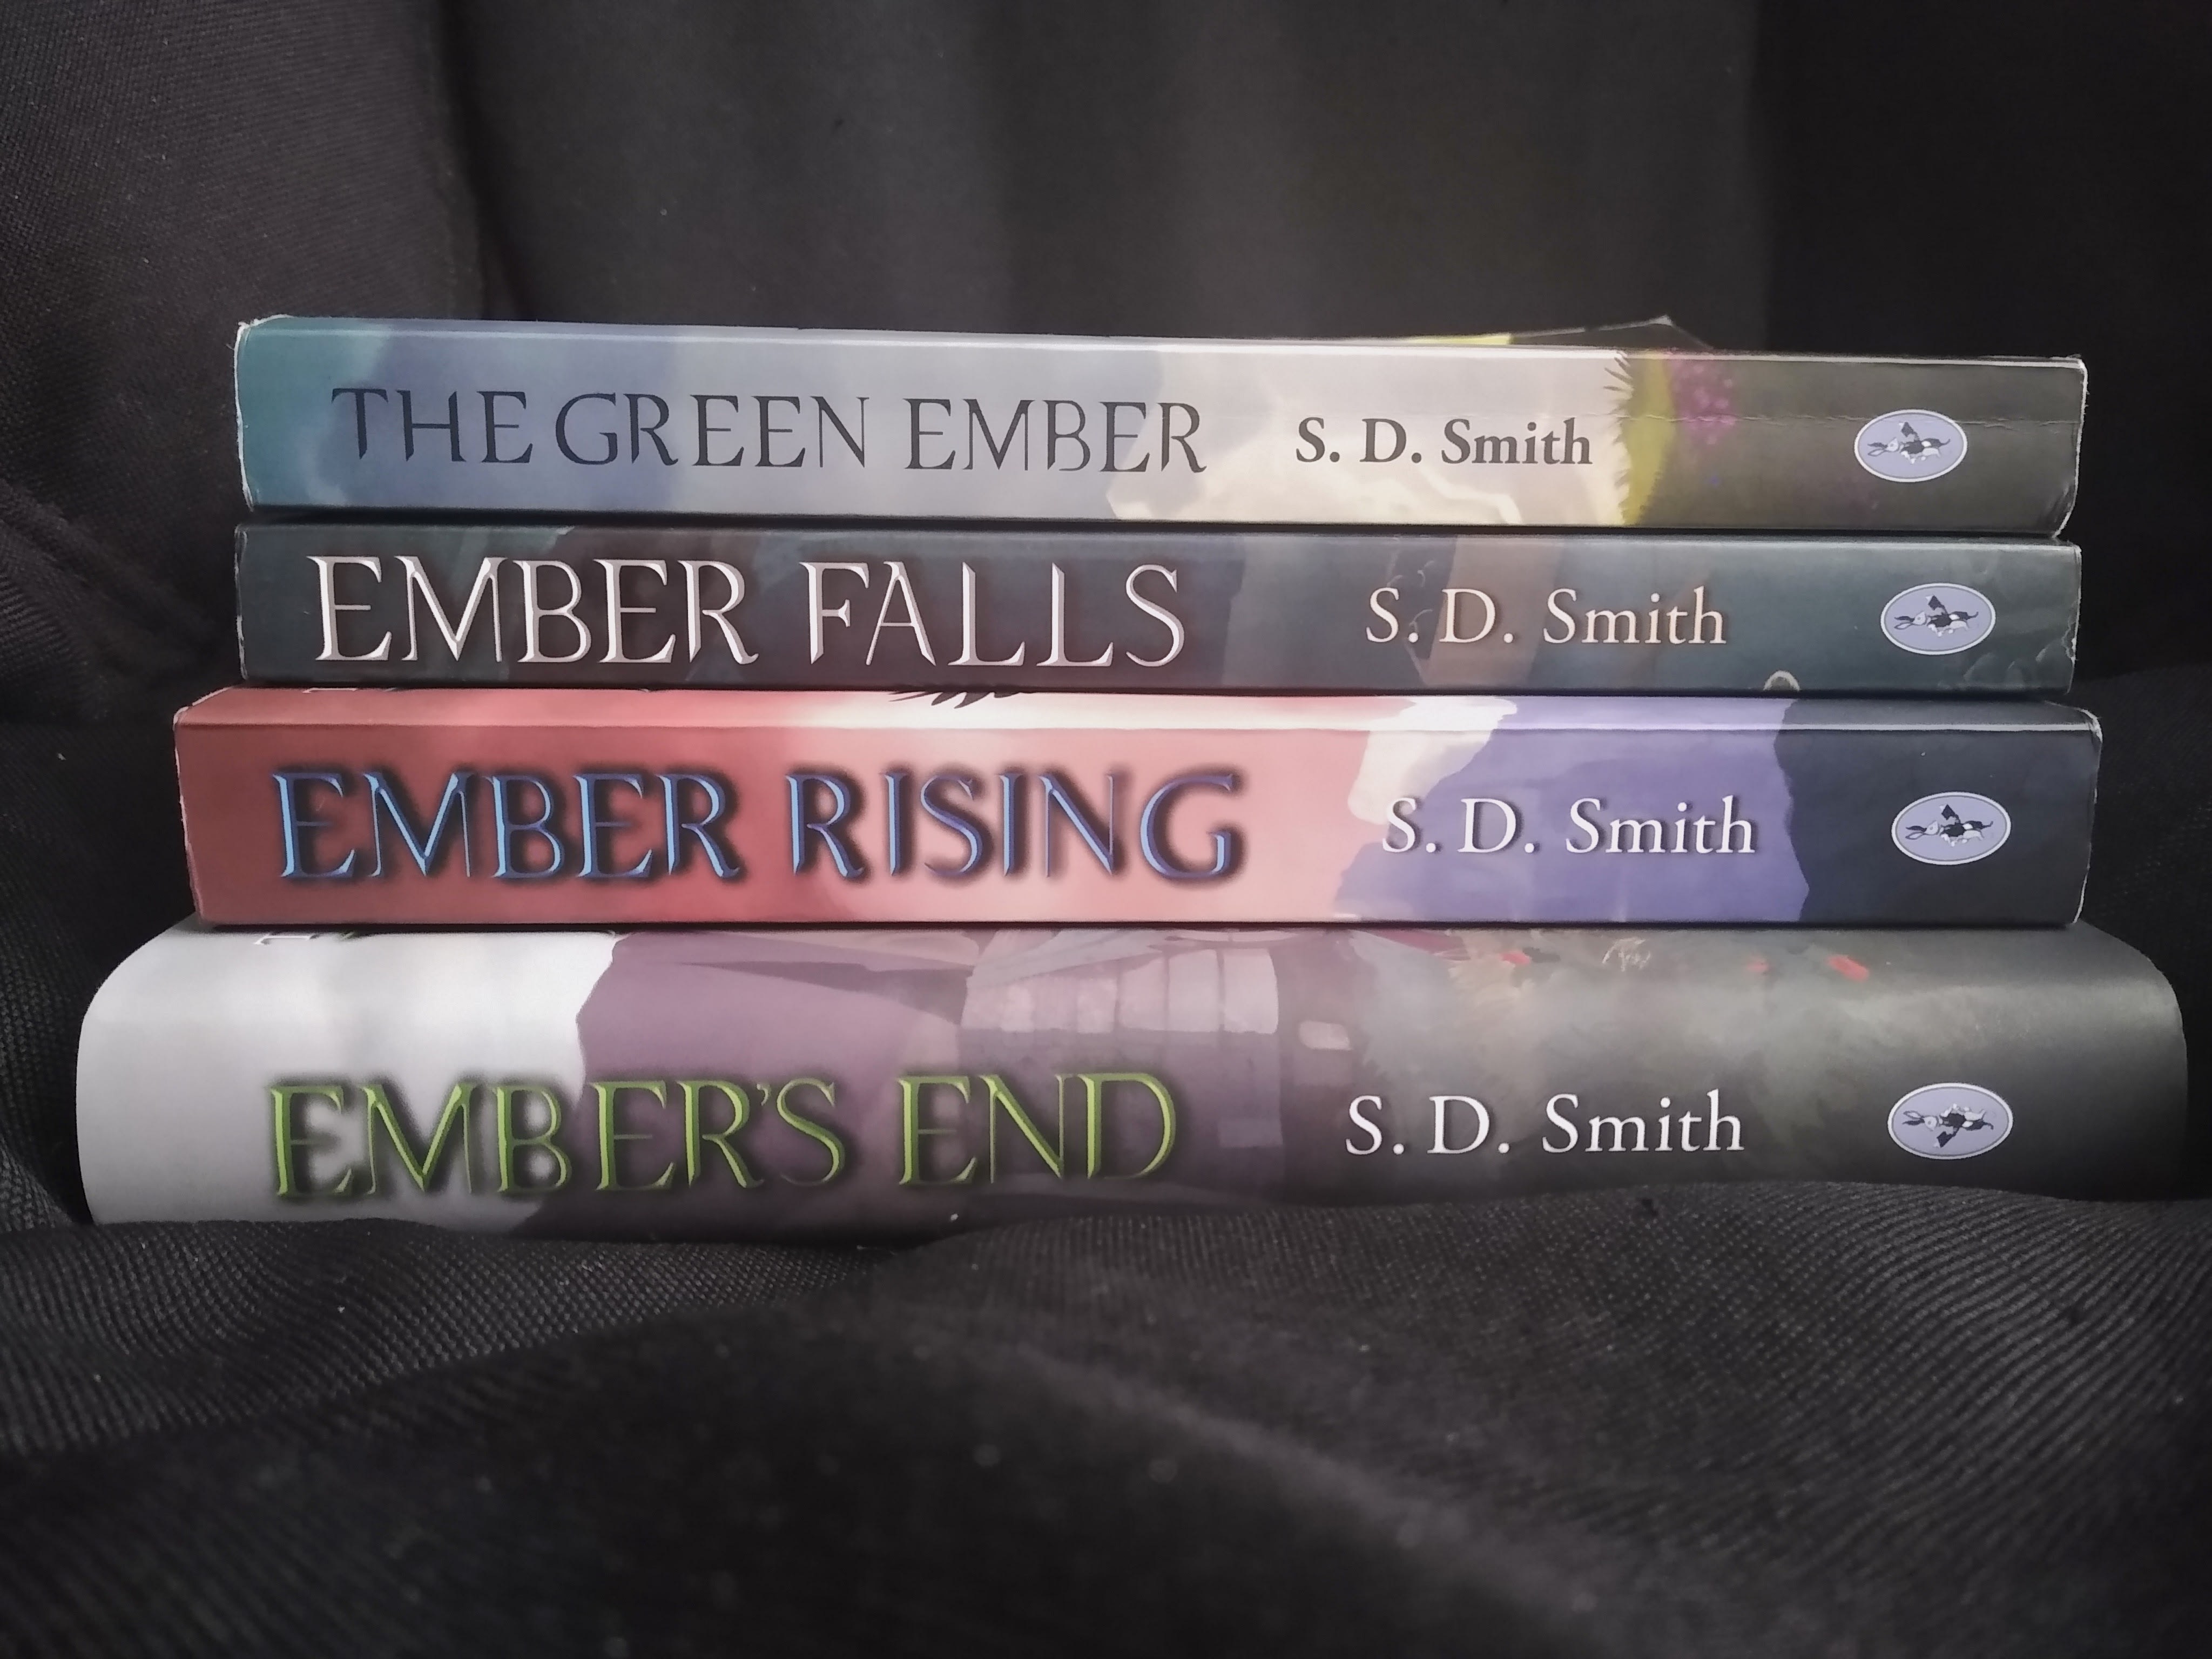 The Green Ember by S.D. Smith